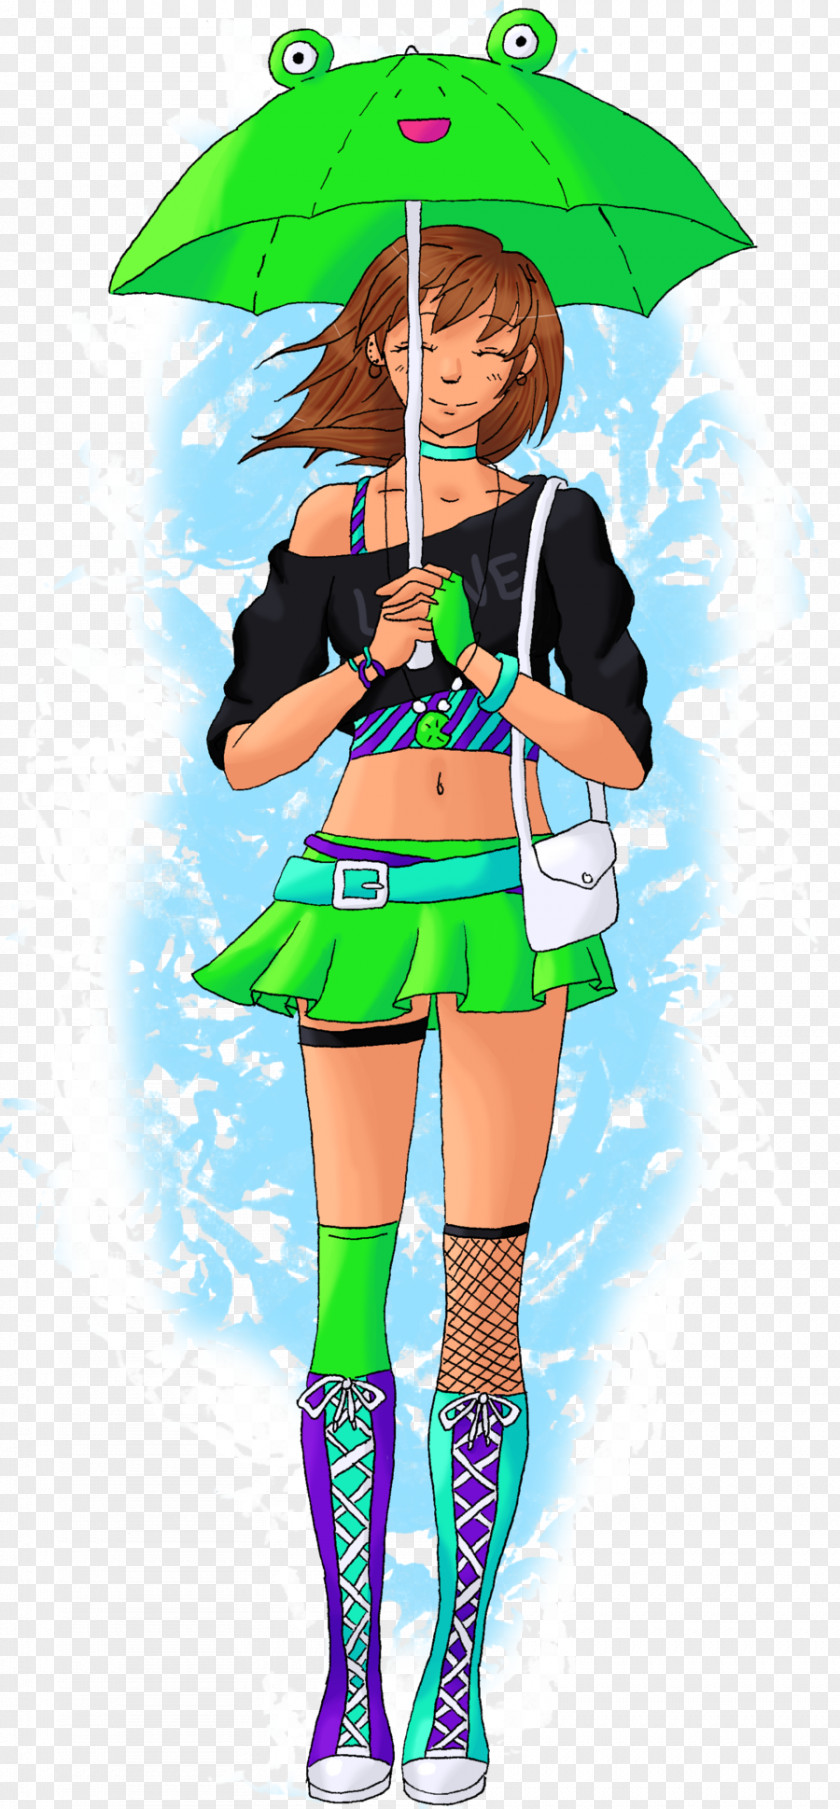 Astrid S Costume Cartoon Character Fiction PNG